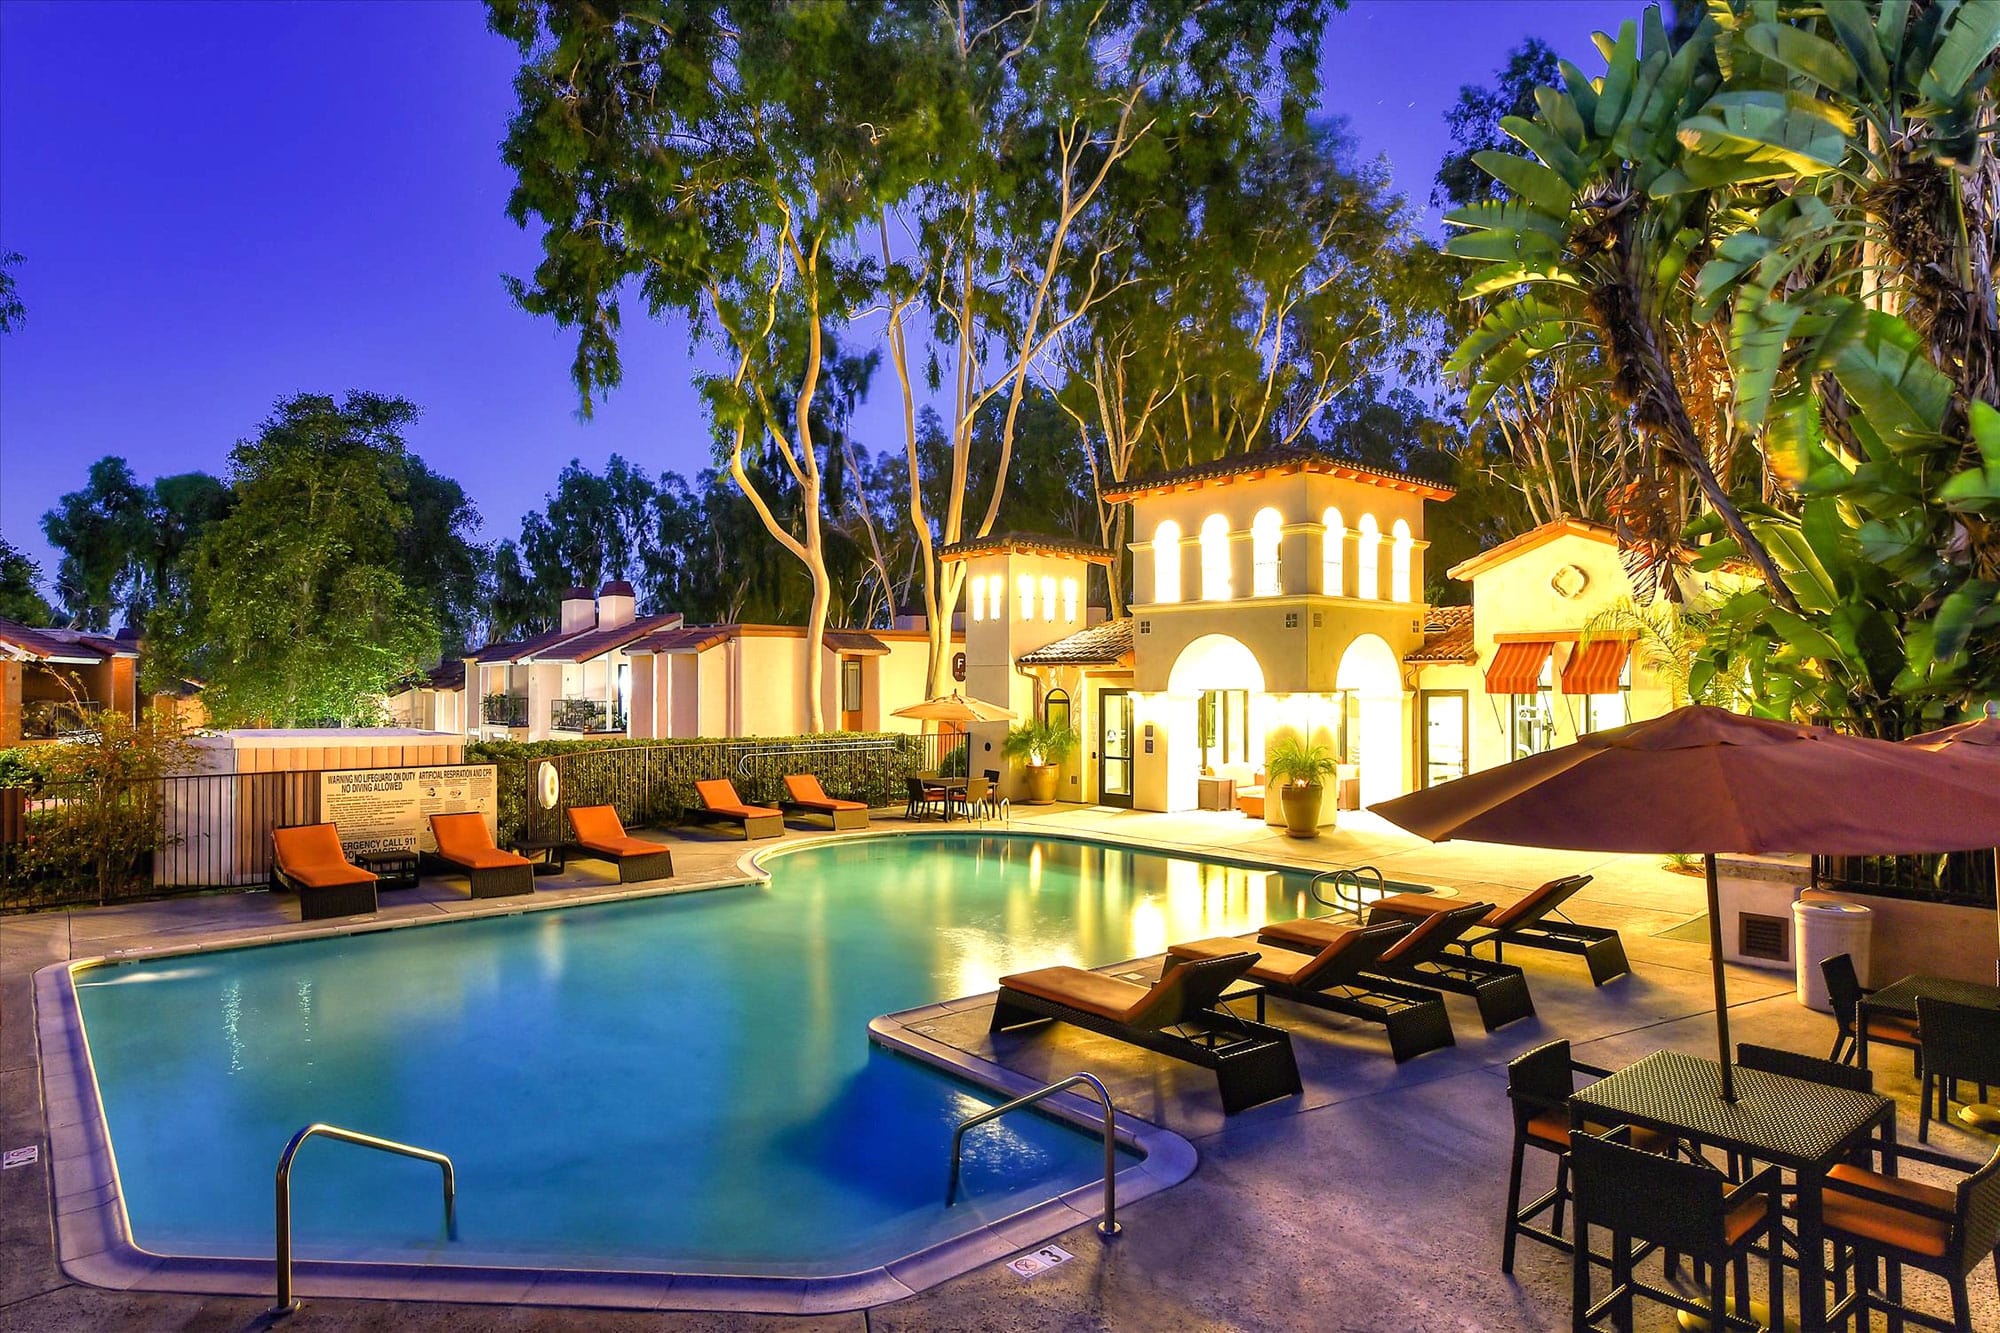 Exterior dusk shot of pool with tropical landscaping, shaded seating, and suntanning beds